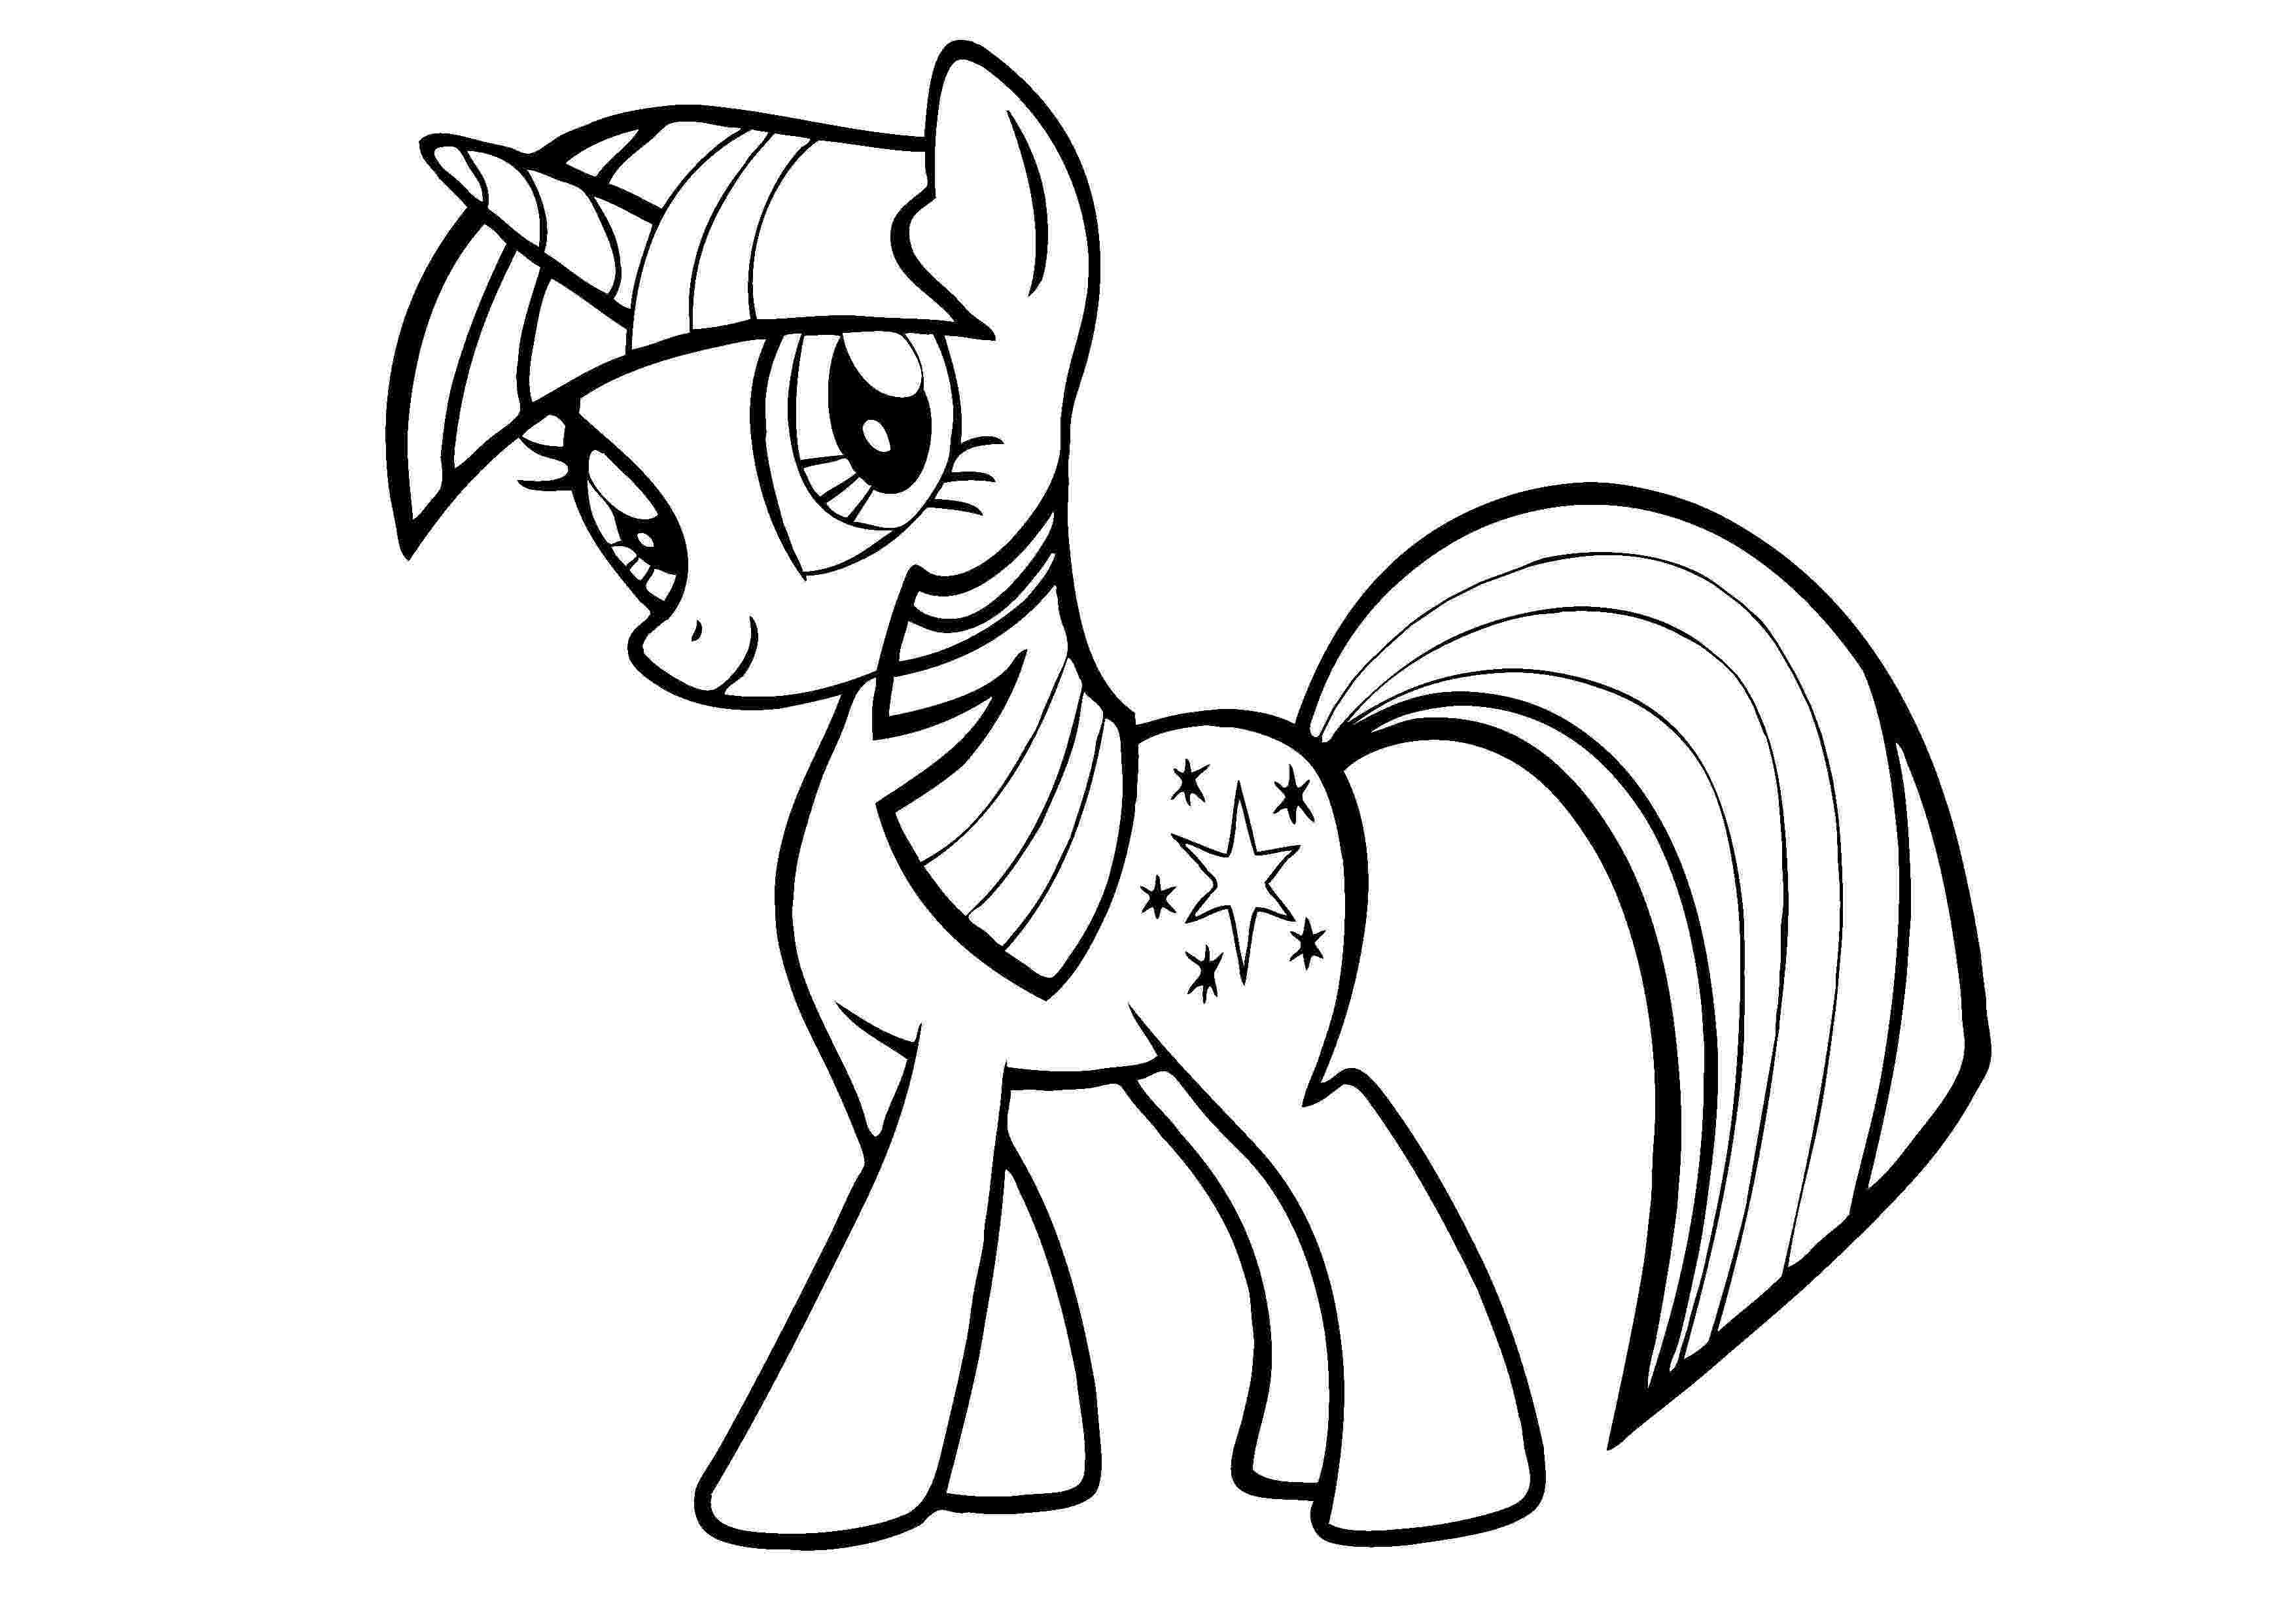 twilight sparkle coloring page my little pony colouring sheets twilight sparkle my twilight sparkle page coloring 